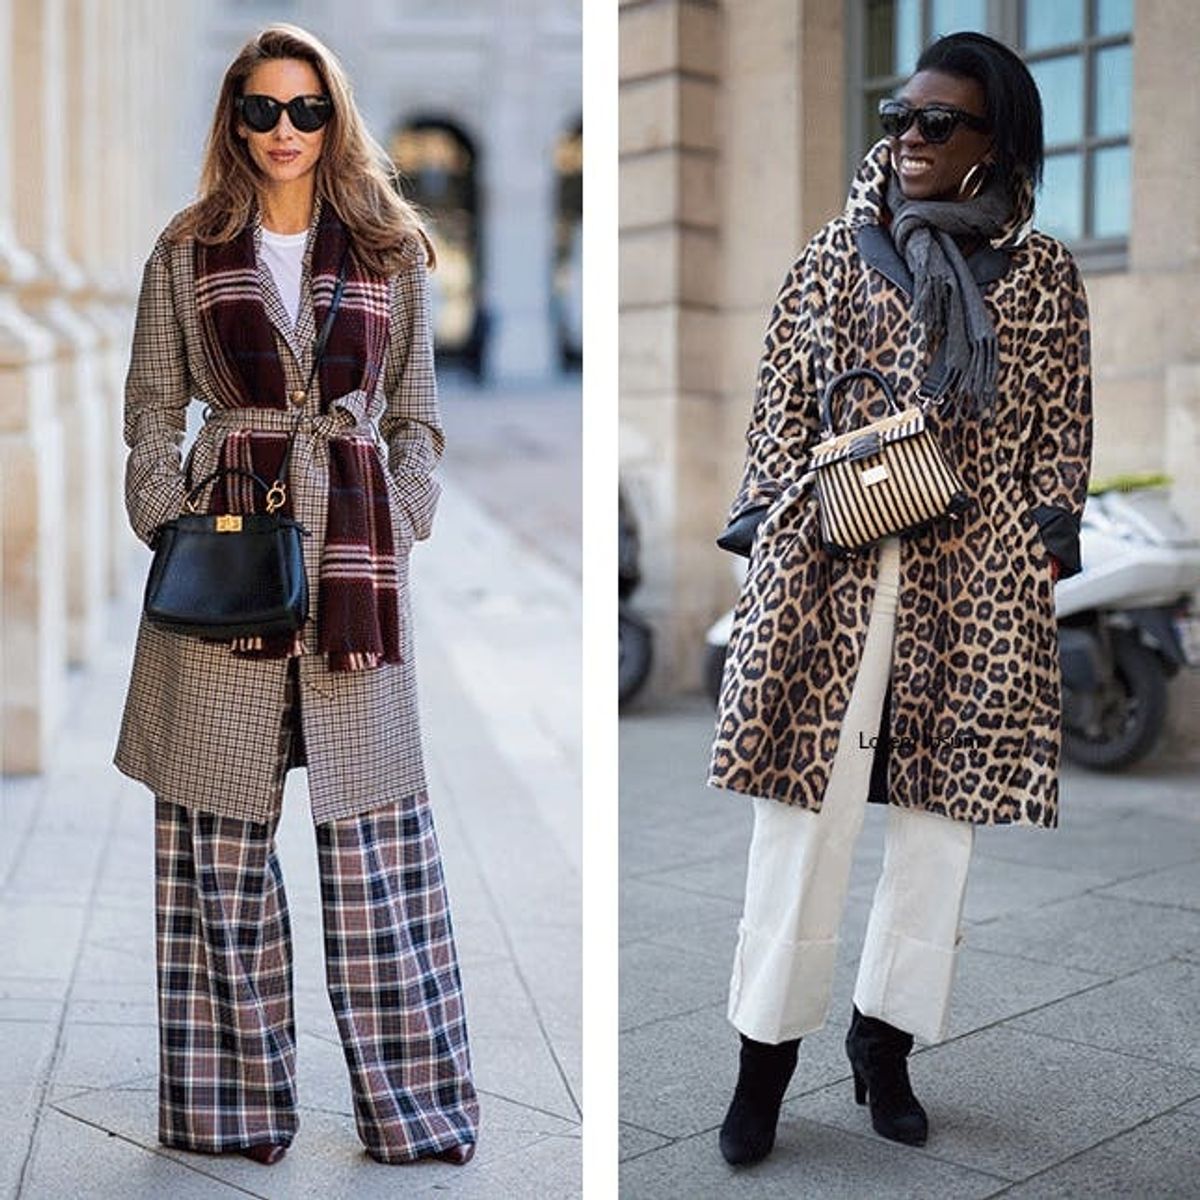 7 Fashionable Ways to Wear a Scarf This Winter